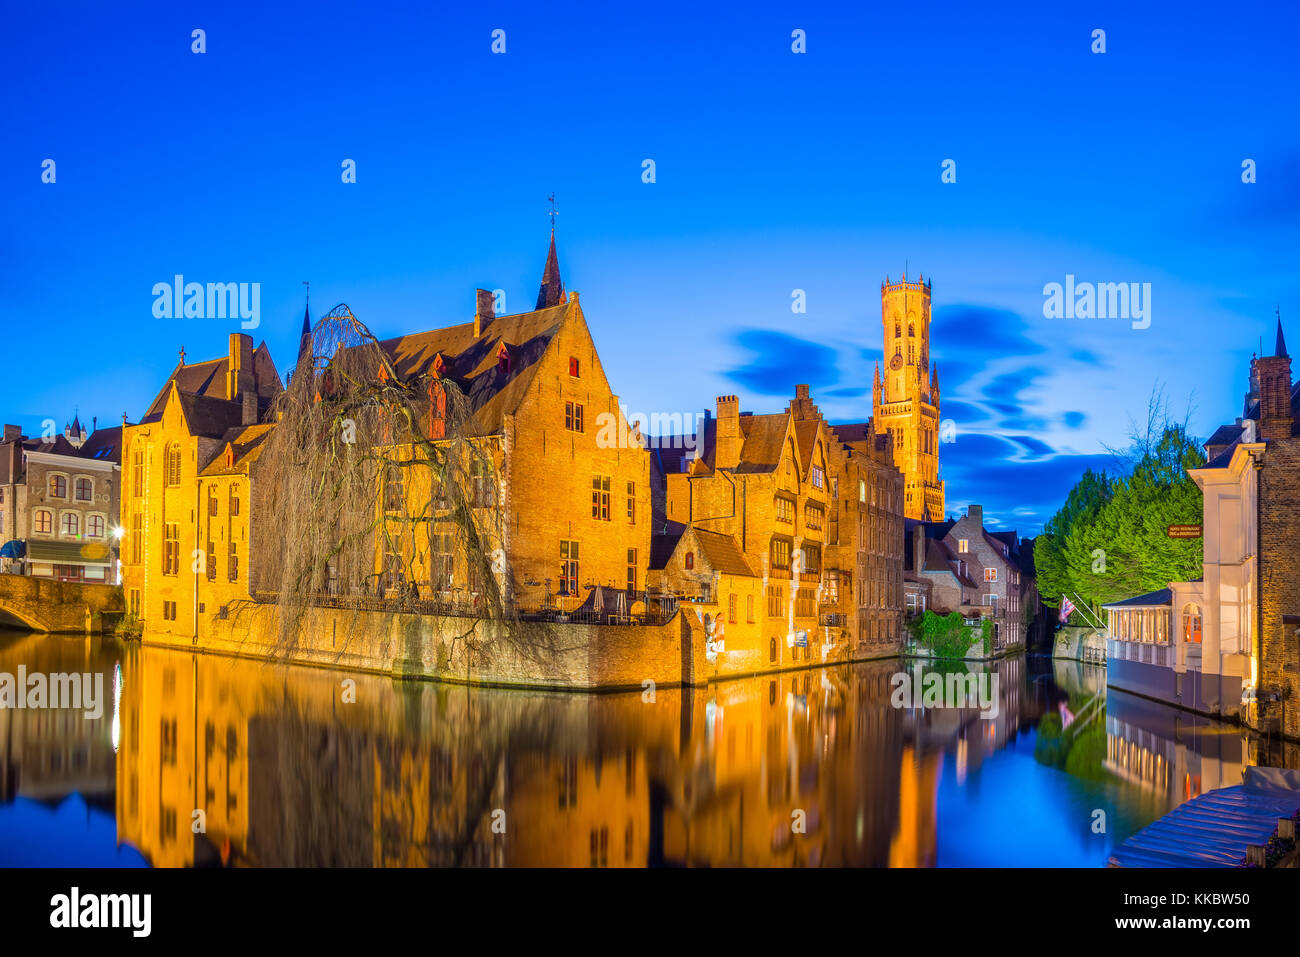 Bruges, Belgium - April 17, 2017: Night shot of historic medieval buildings along a canal in Bruges, Belgium Stock Photo